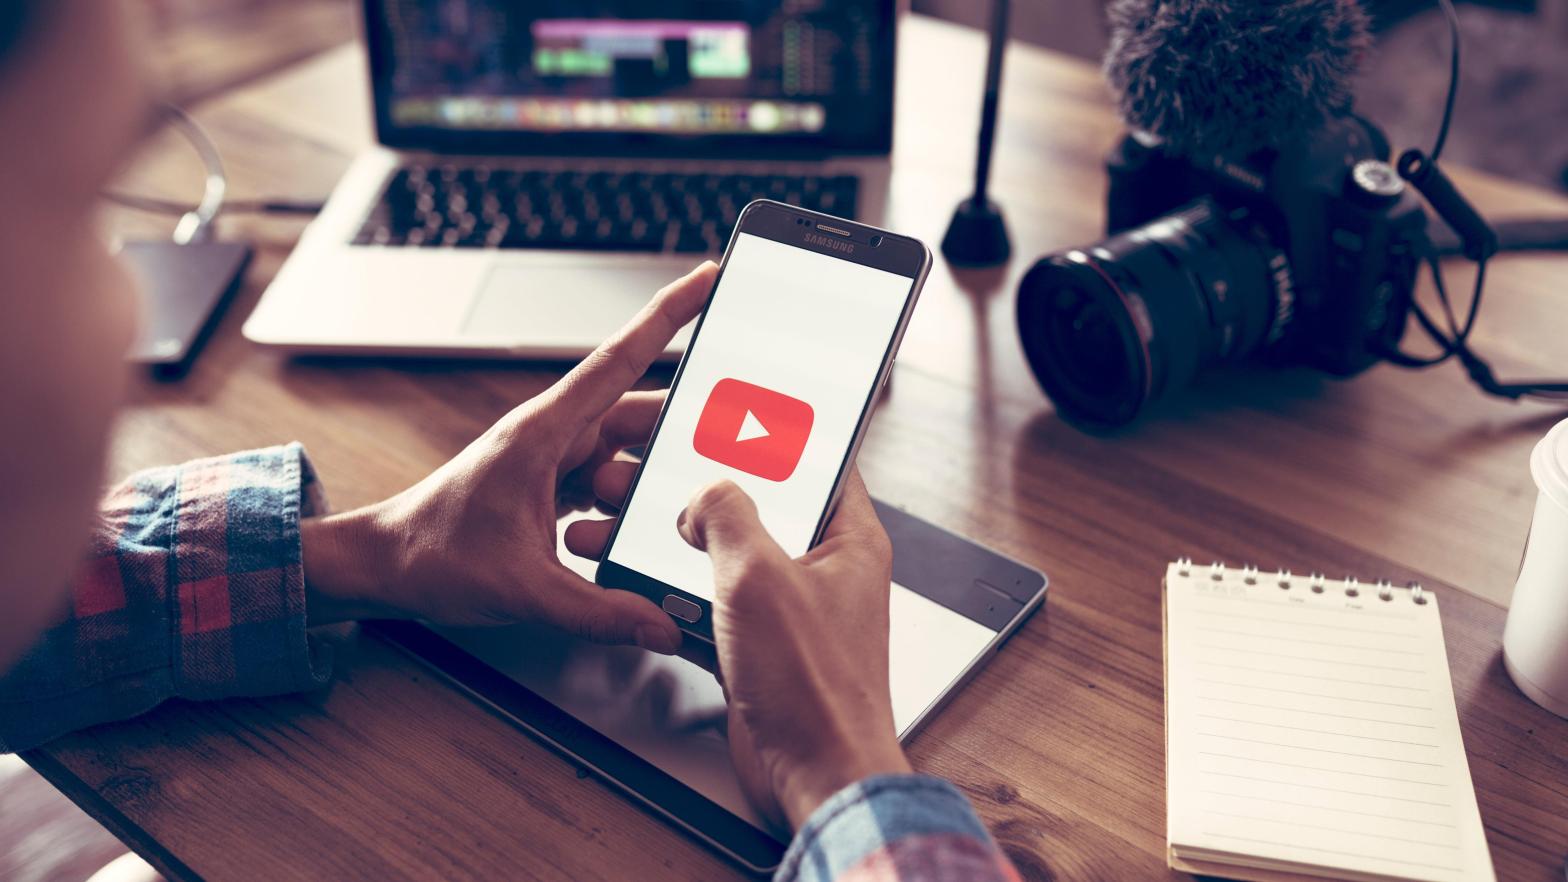 YouTube implemented a strict no-cussing policy last November that even demonetised older videos which used profanity in the first eight seconds of a video. (Photo: Sutipond Somnam, Shutterstock)